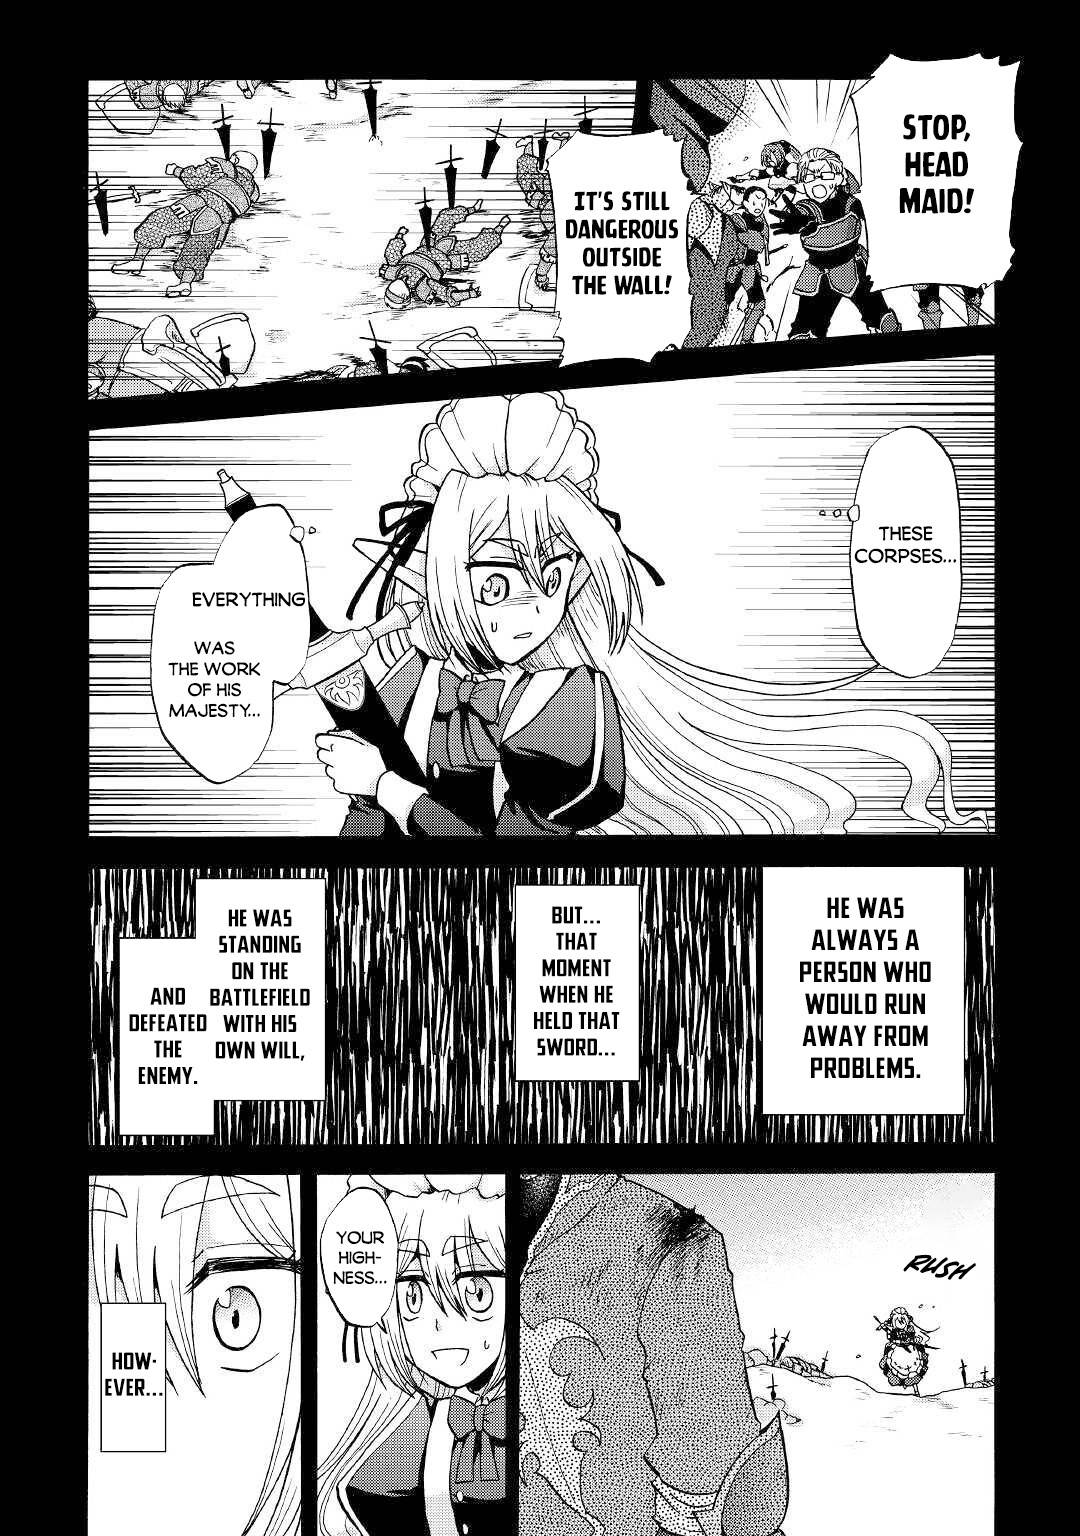 Previous Life Was Sword Emperor. This Life Is Trash Prince. - chapter 13 - #2